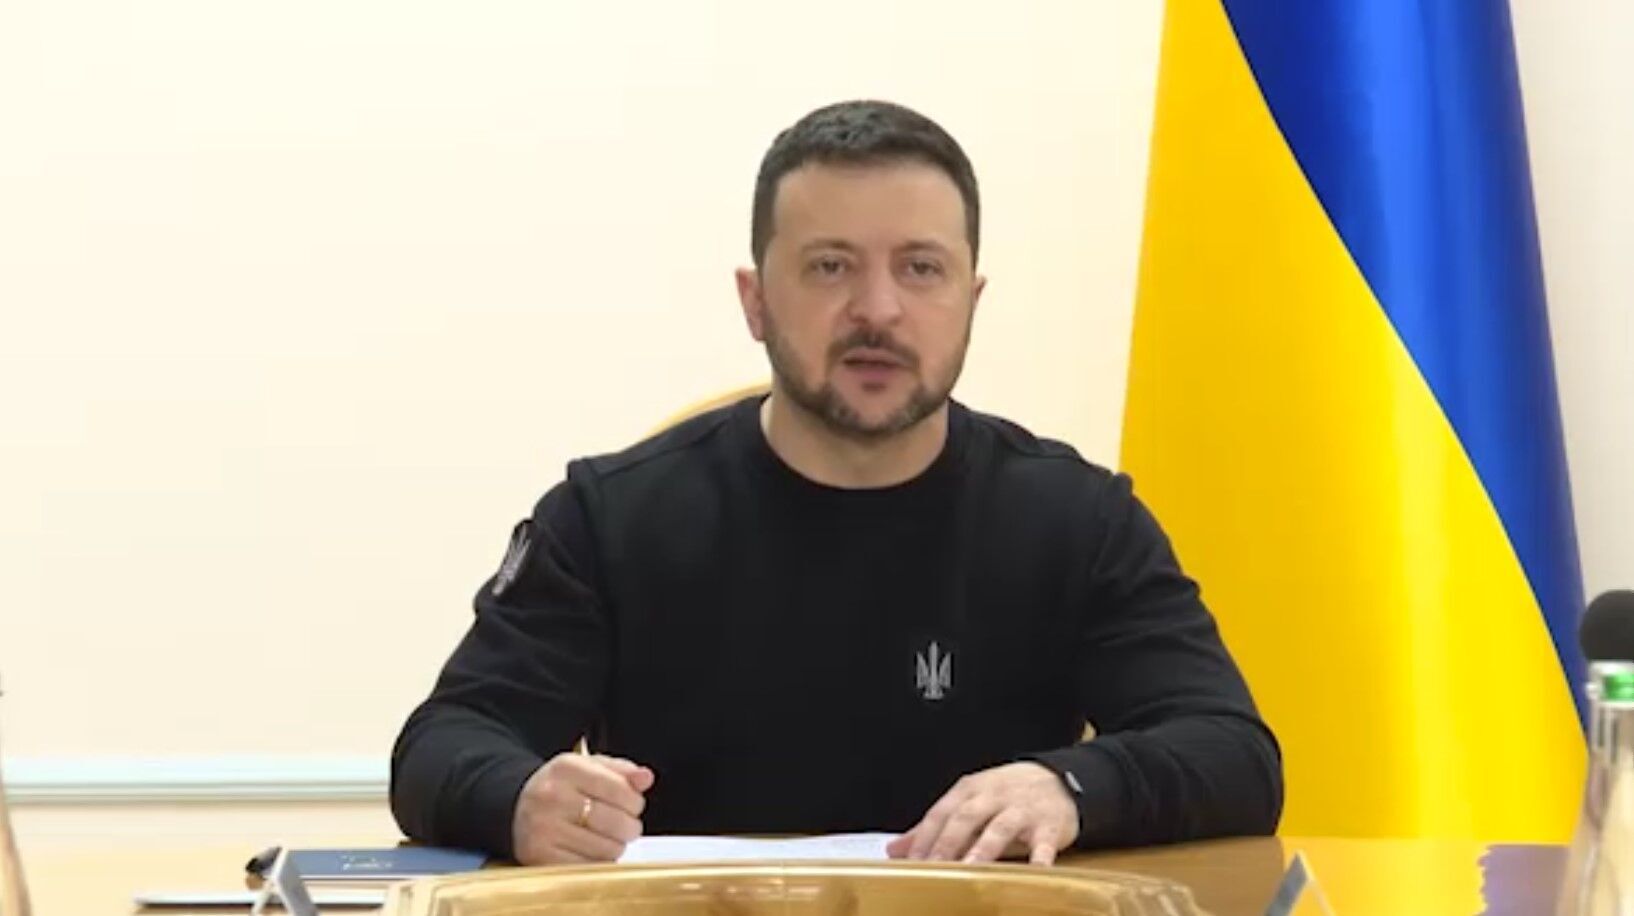 ''The priority is the defense of the state'': Zelenskyy spoke about changes in the work of the National Security and Defense Council and named the priority tasks